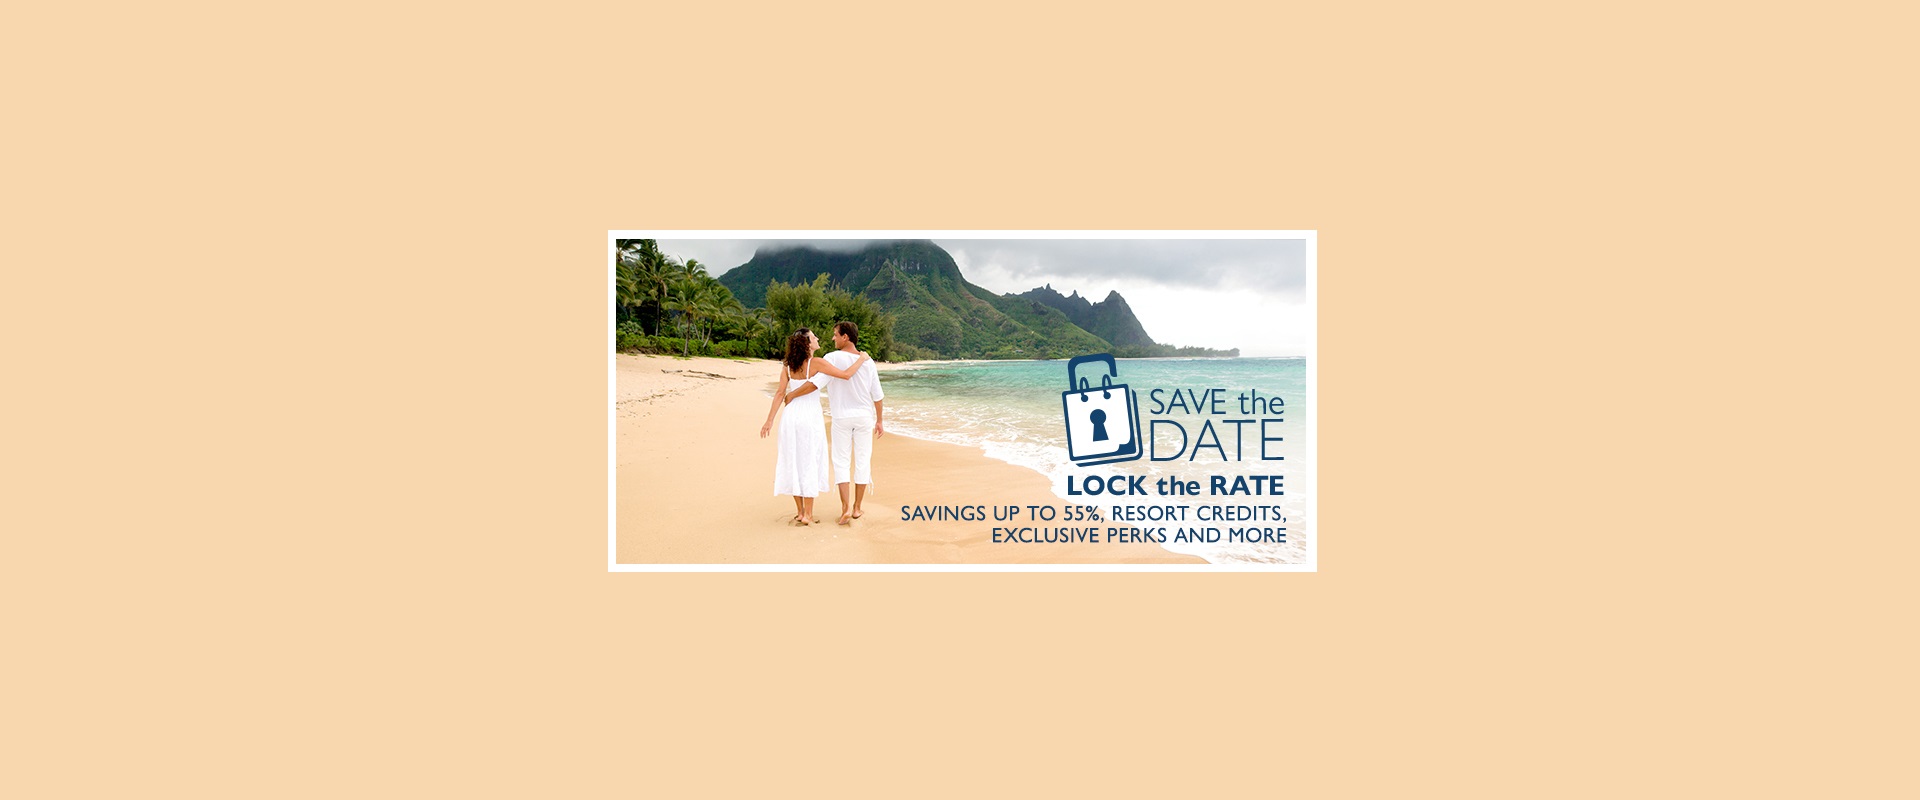 Save-the-Date-Lock-the-Rate-Header